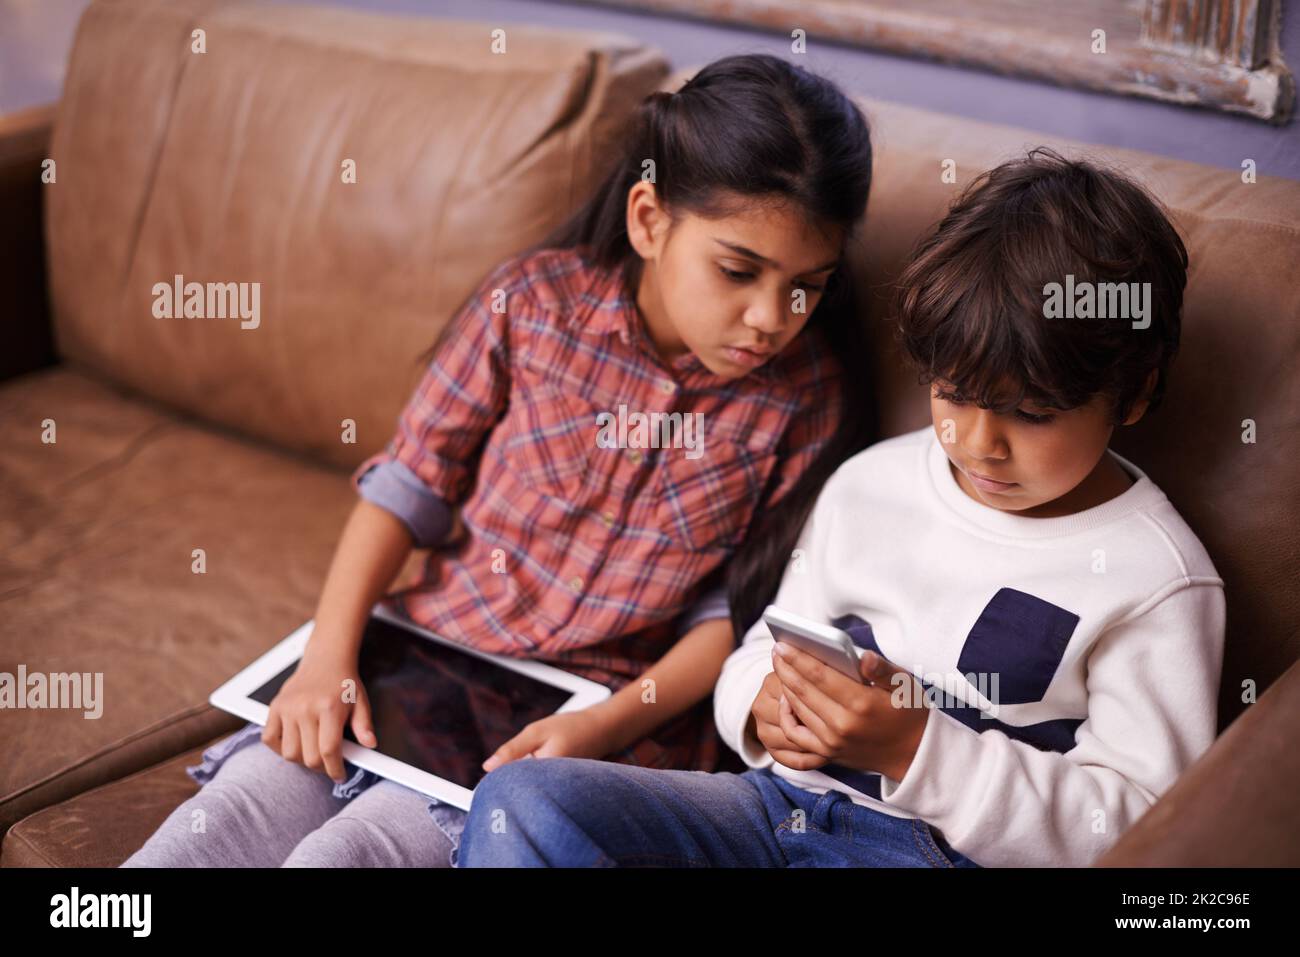 Playing around with tech. Shot of two siblings playing with their digital devices at home. Stock Photo